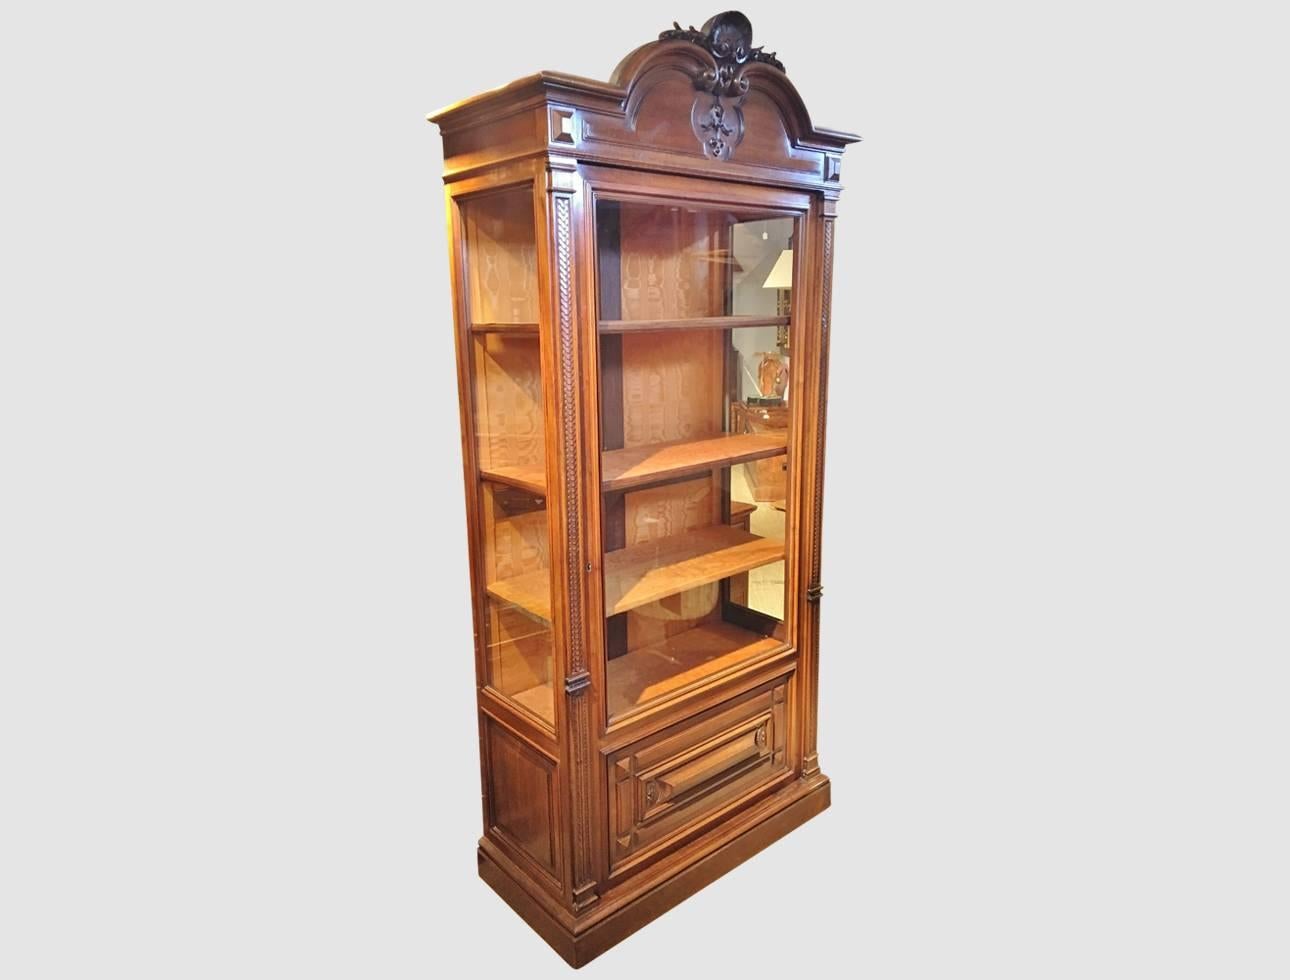 Attractive walnut display cabinet. French, circa 1880.

This cabinet has been well maintained. In straight grain French Walnut, It is compact with Glass side panels giving extra light and visibility. 

The Plush Silk interior is in excellent